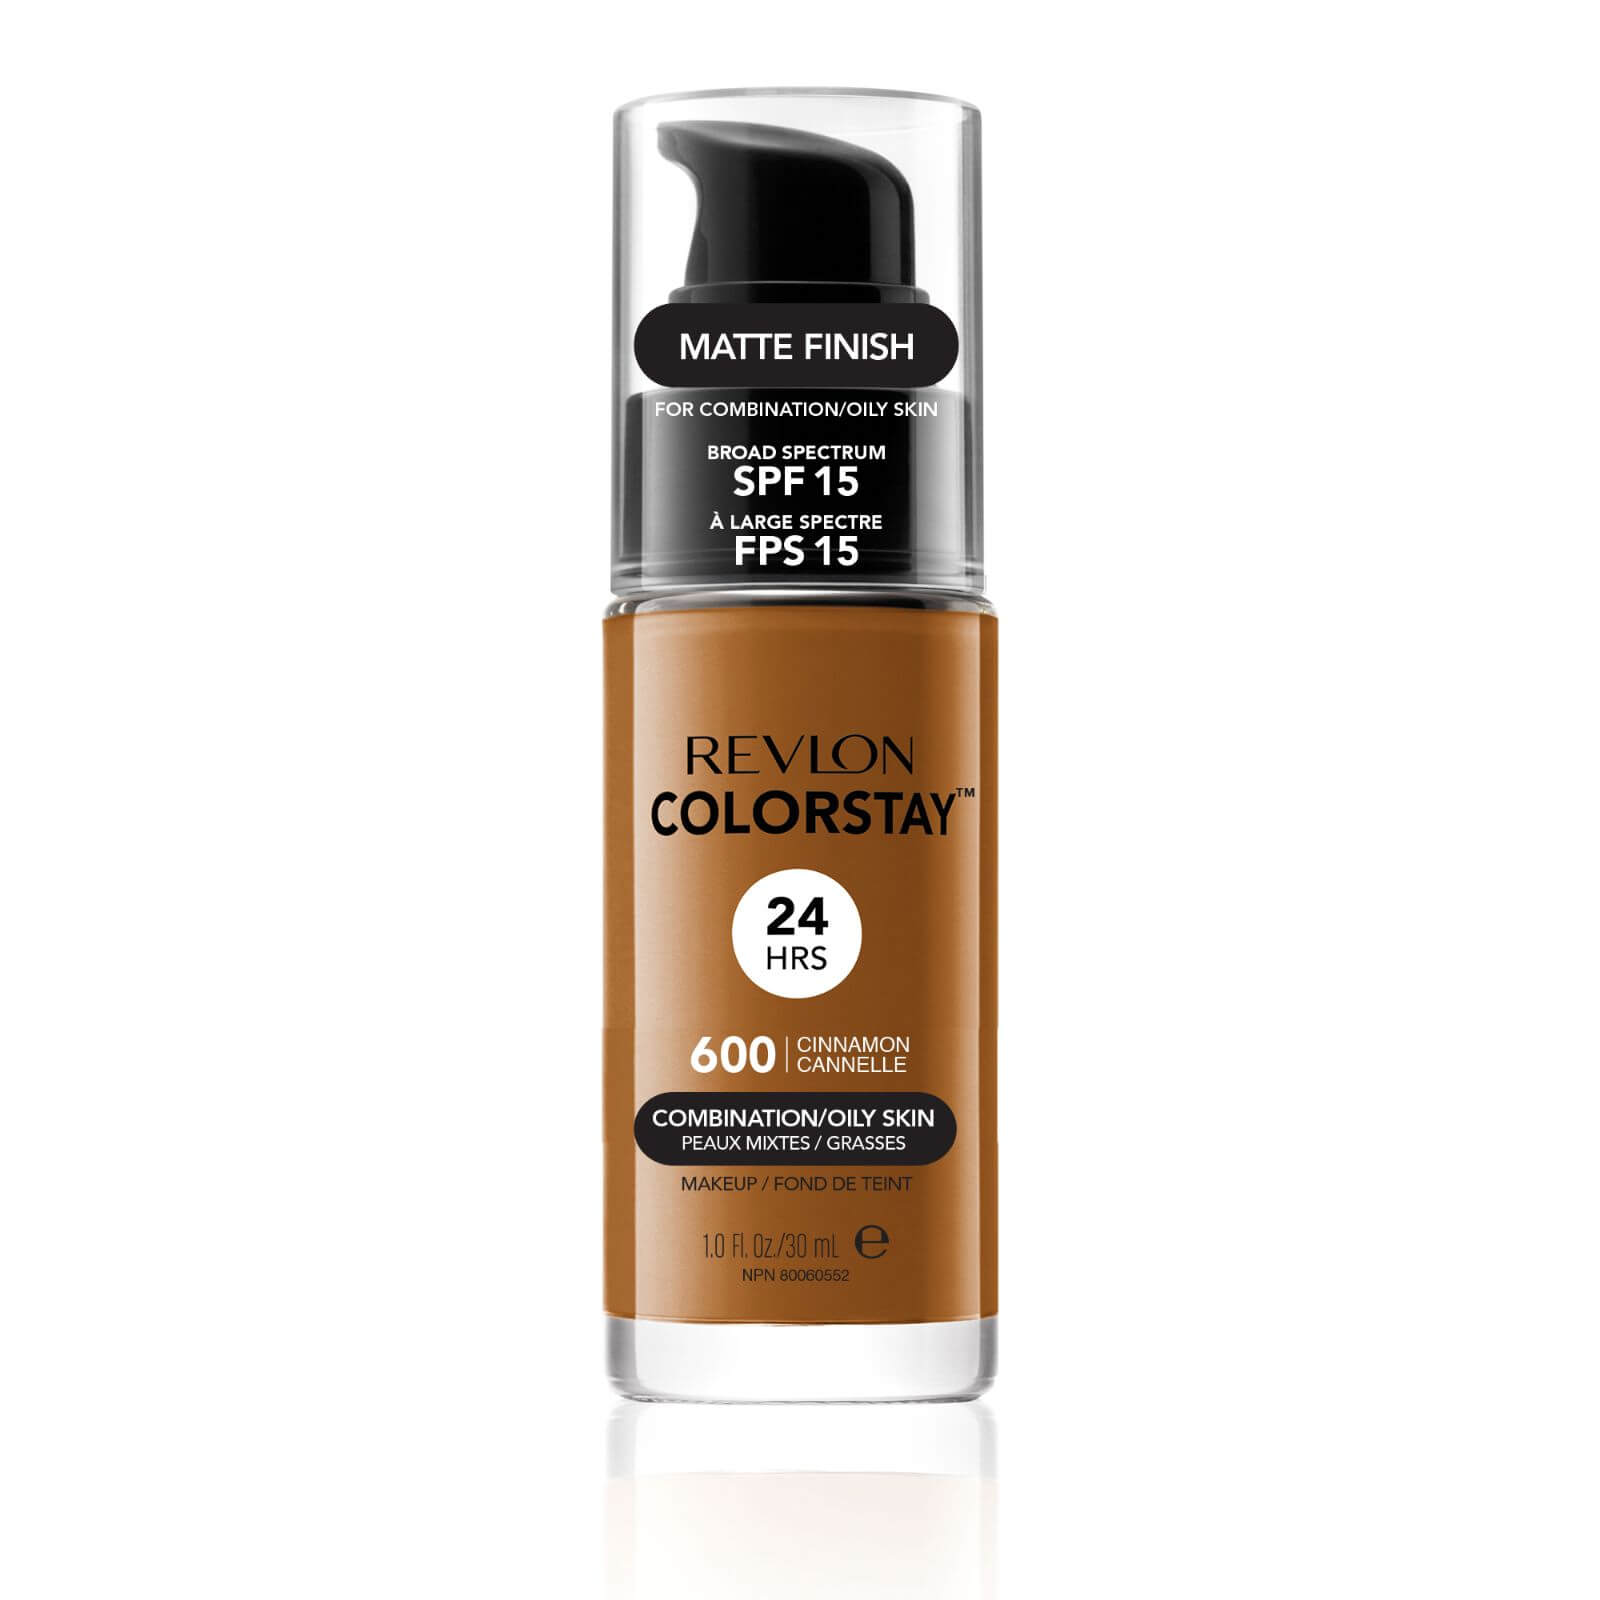 Revlon ColorStay Make-Up Foundation for Combination/Oily Skin (Various Shades) - Cinnamon